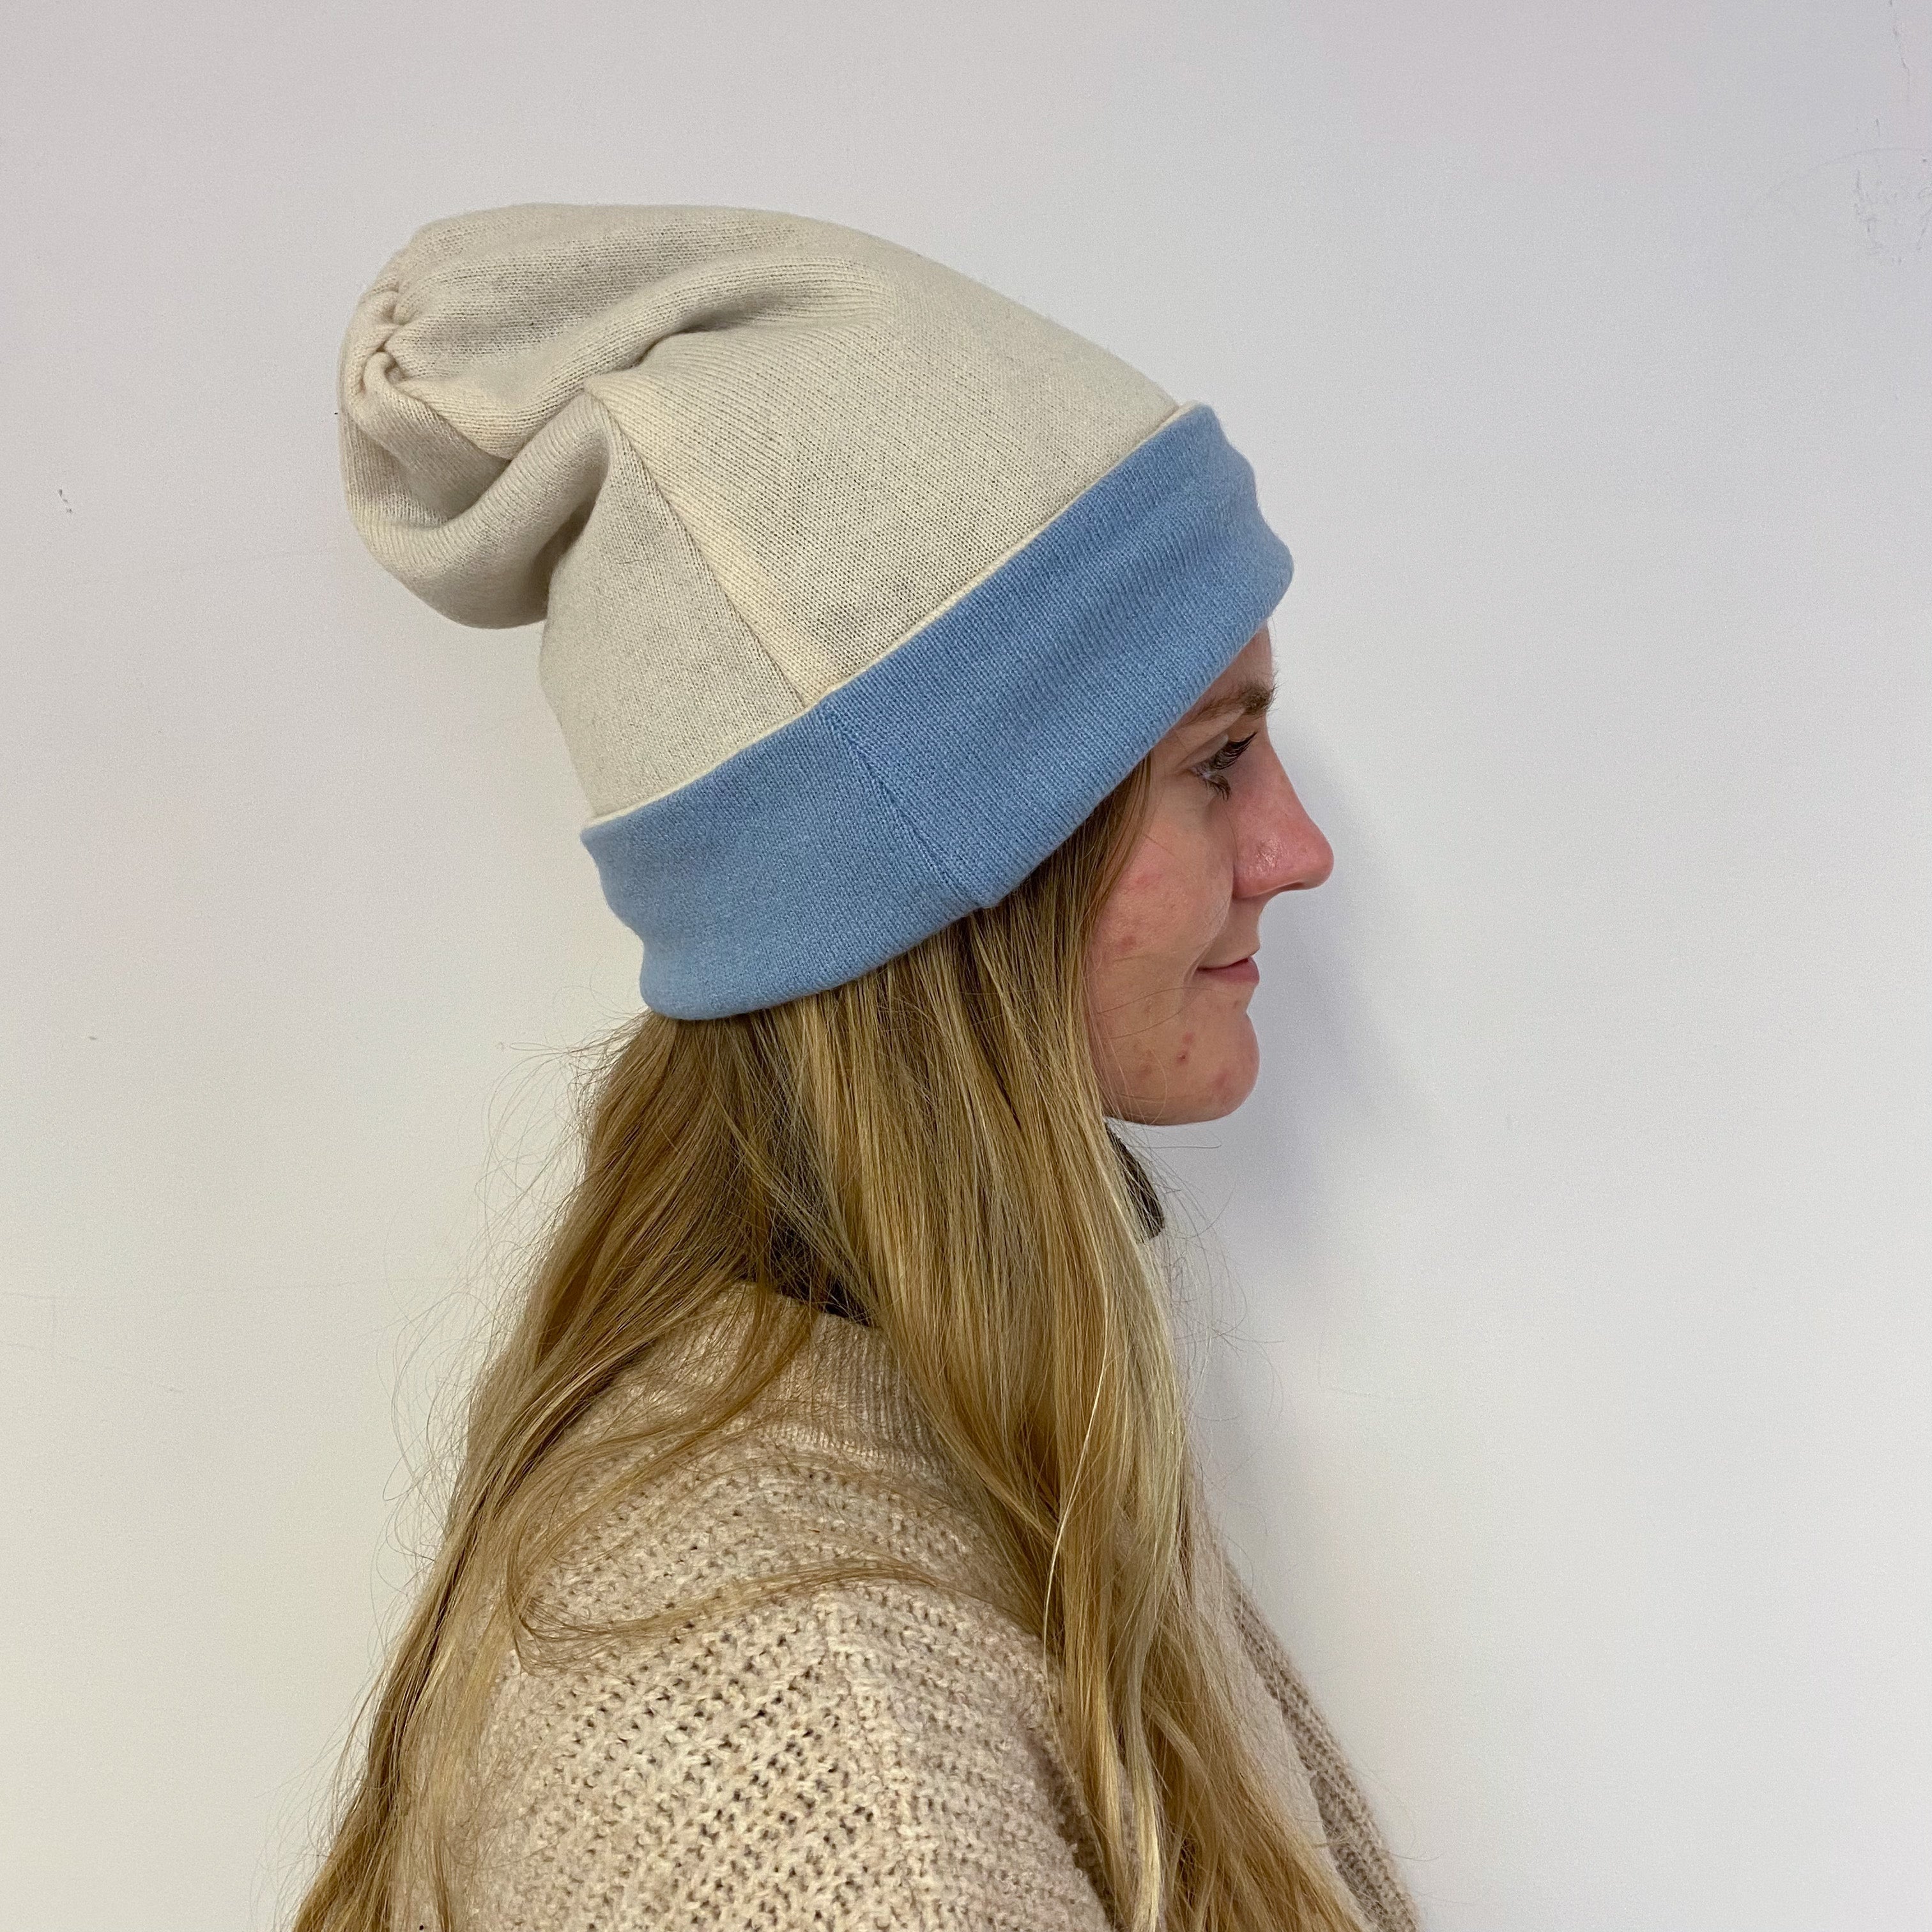 Reversible Pale Blue and Cream Beanie Hat One Size